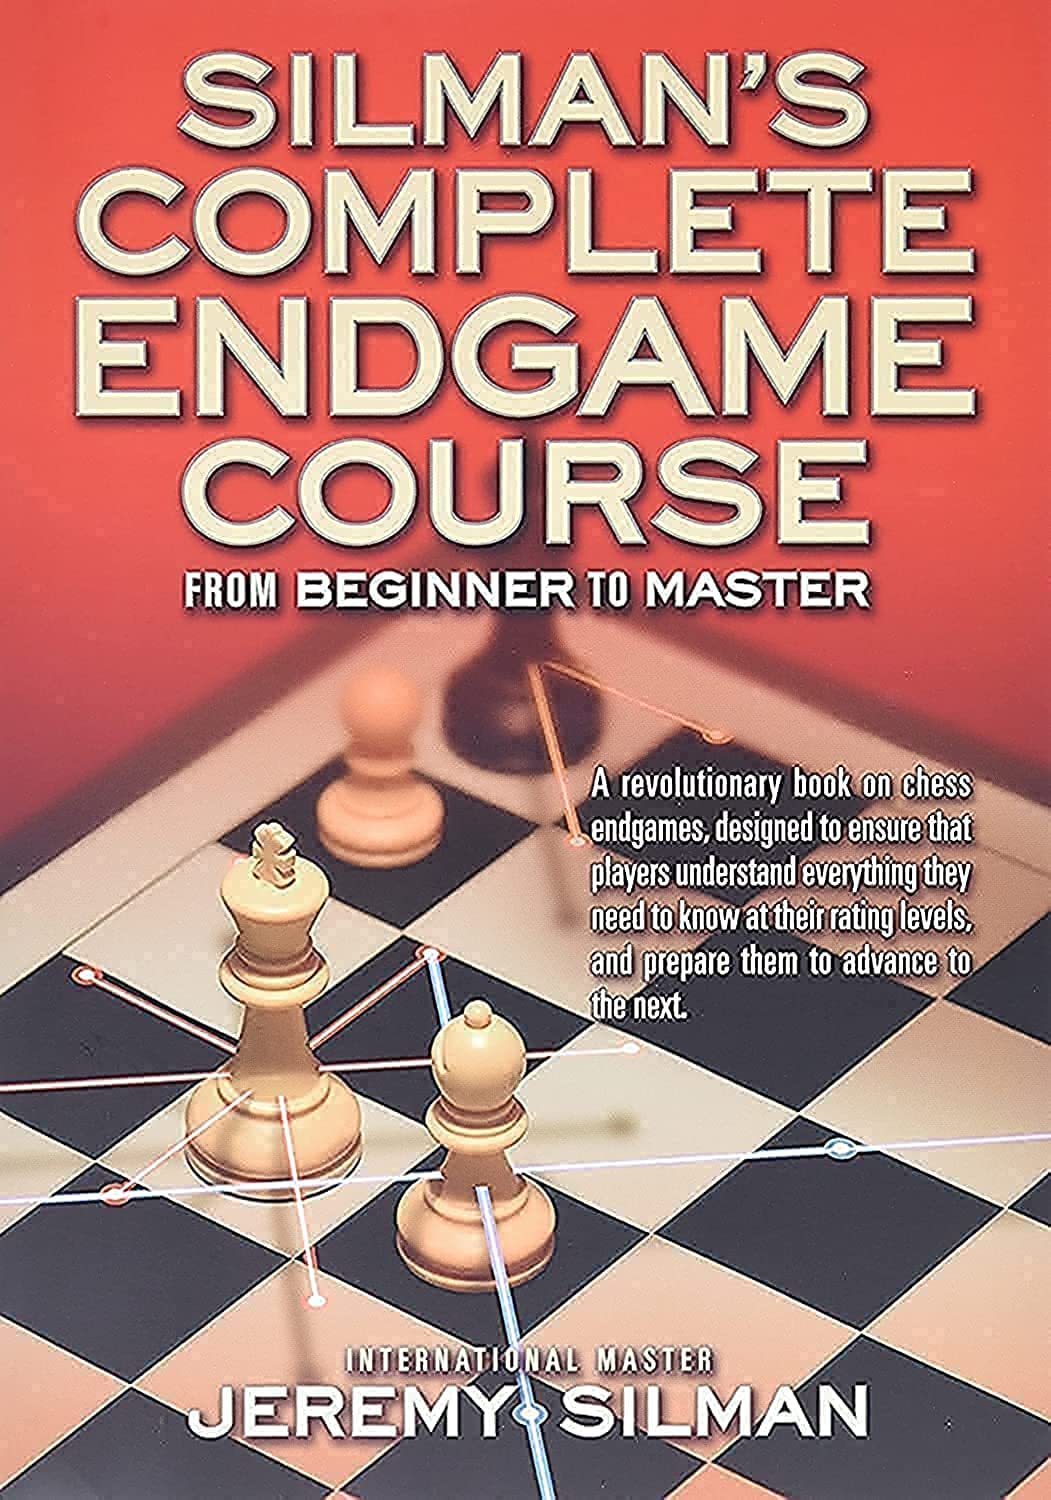 Silman's Complete Endgame Course From Beginner To Master by Jeremy Silman